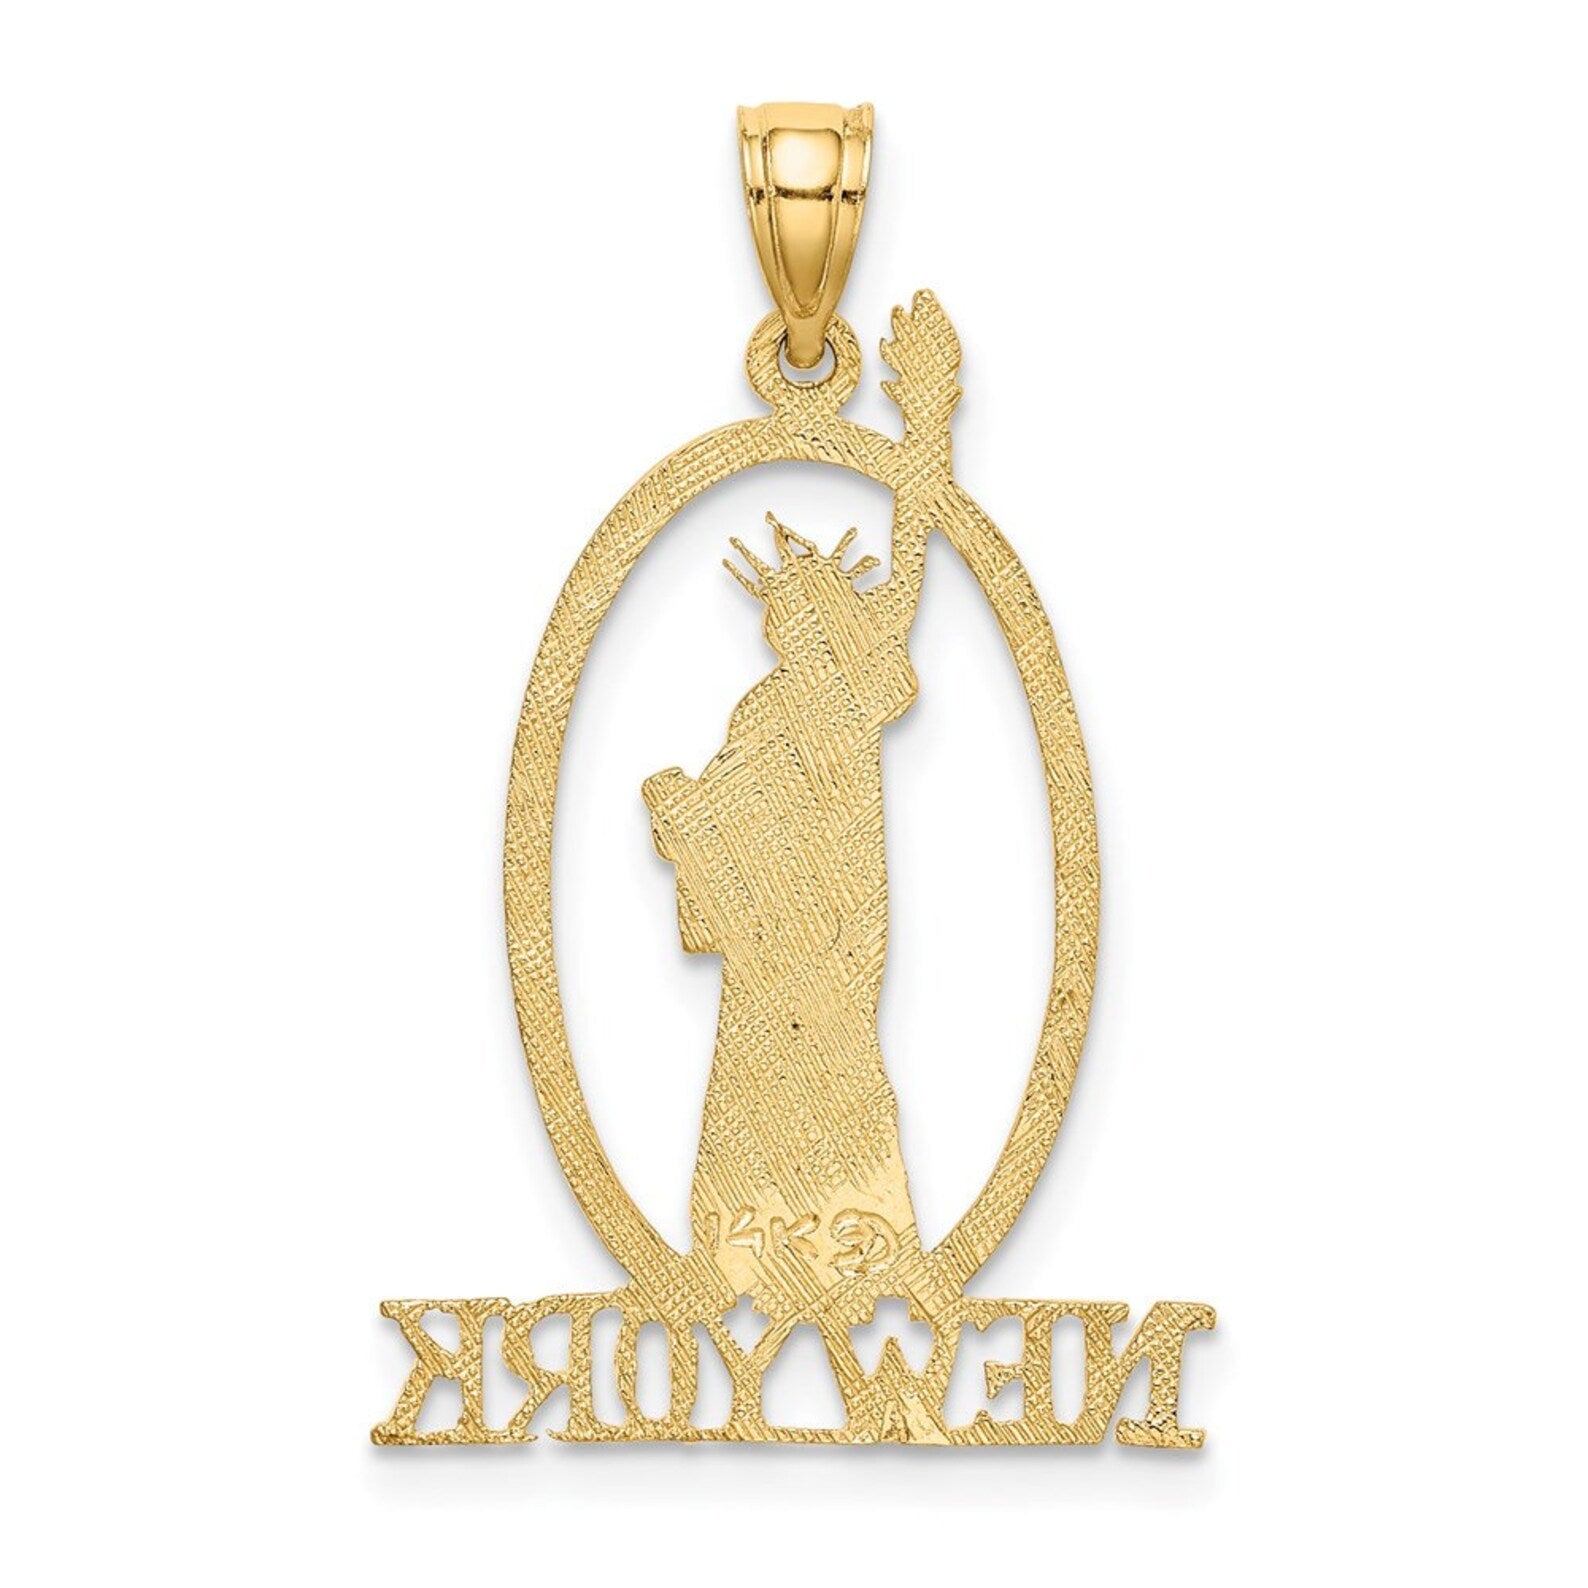 Gold New York with Statue of Liberty Charm Model-C3073